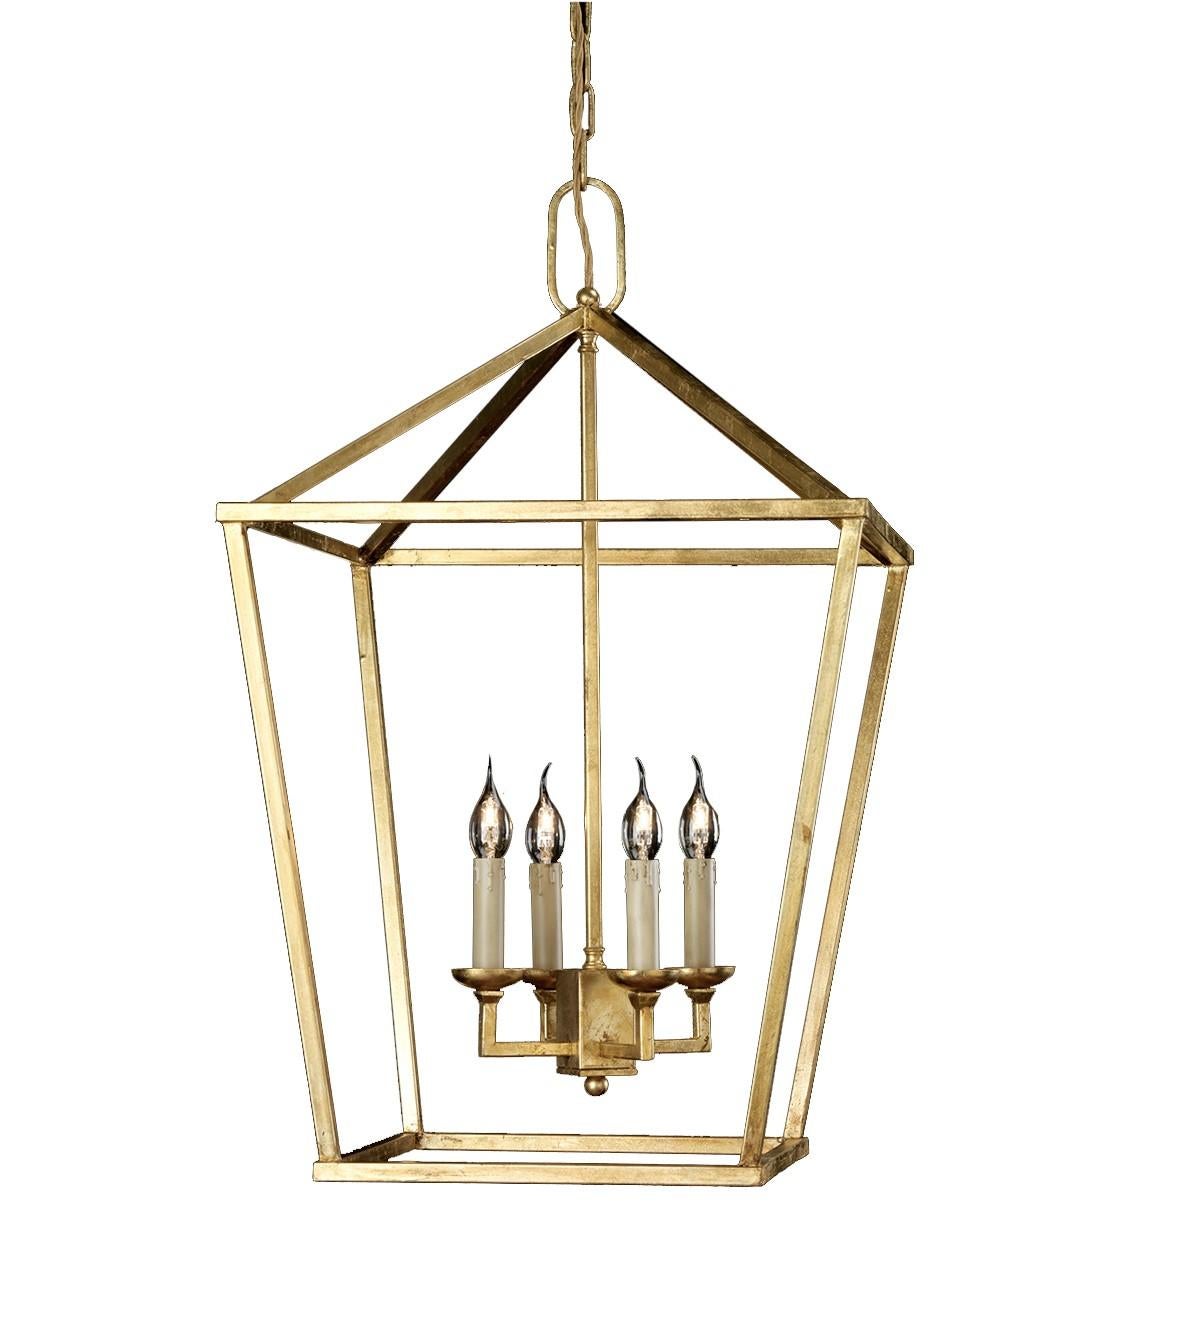 This splendid lantern is entirely made of brass with a warm gold finish. Its structure is created by joining rods at right angles to form an open, three-dimensional design that evokes the understated elegance of origami figures. Four glass lights